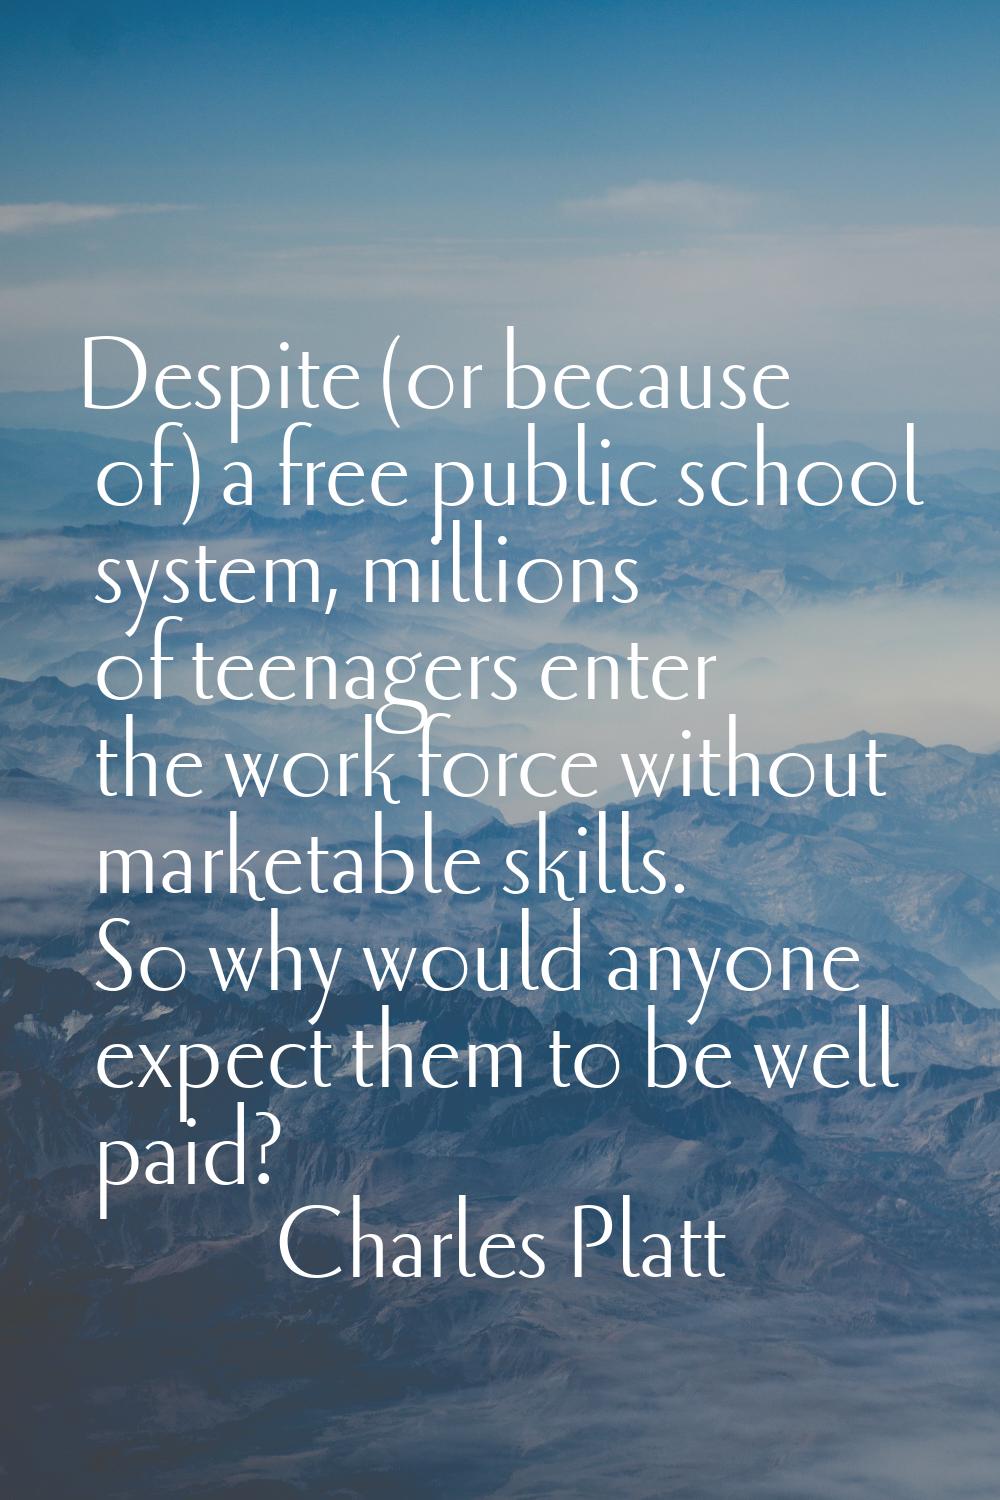 Despite (or because of) a free public school system, millions of teenagers enter the work force wit